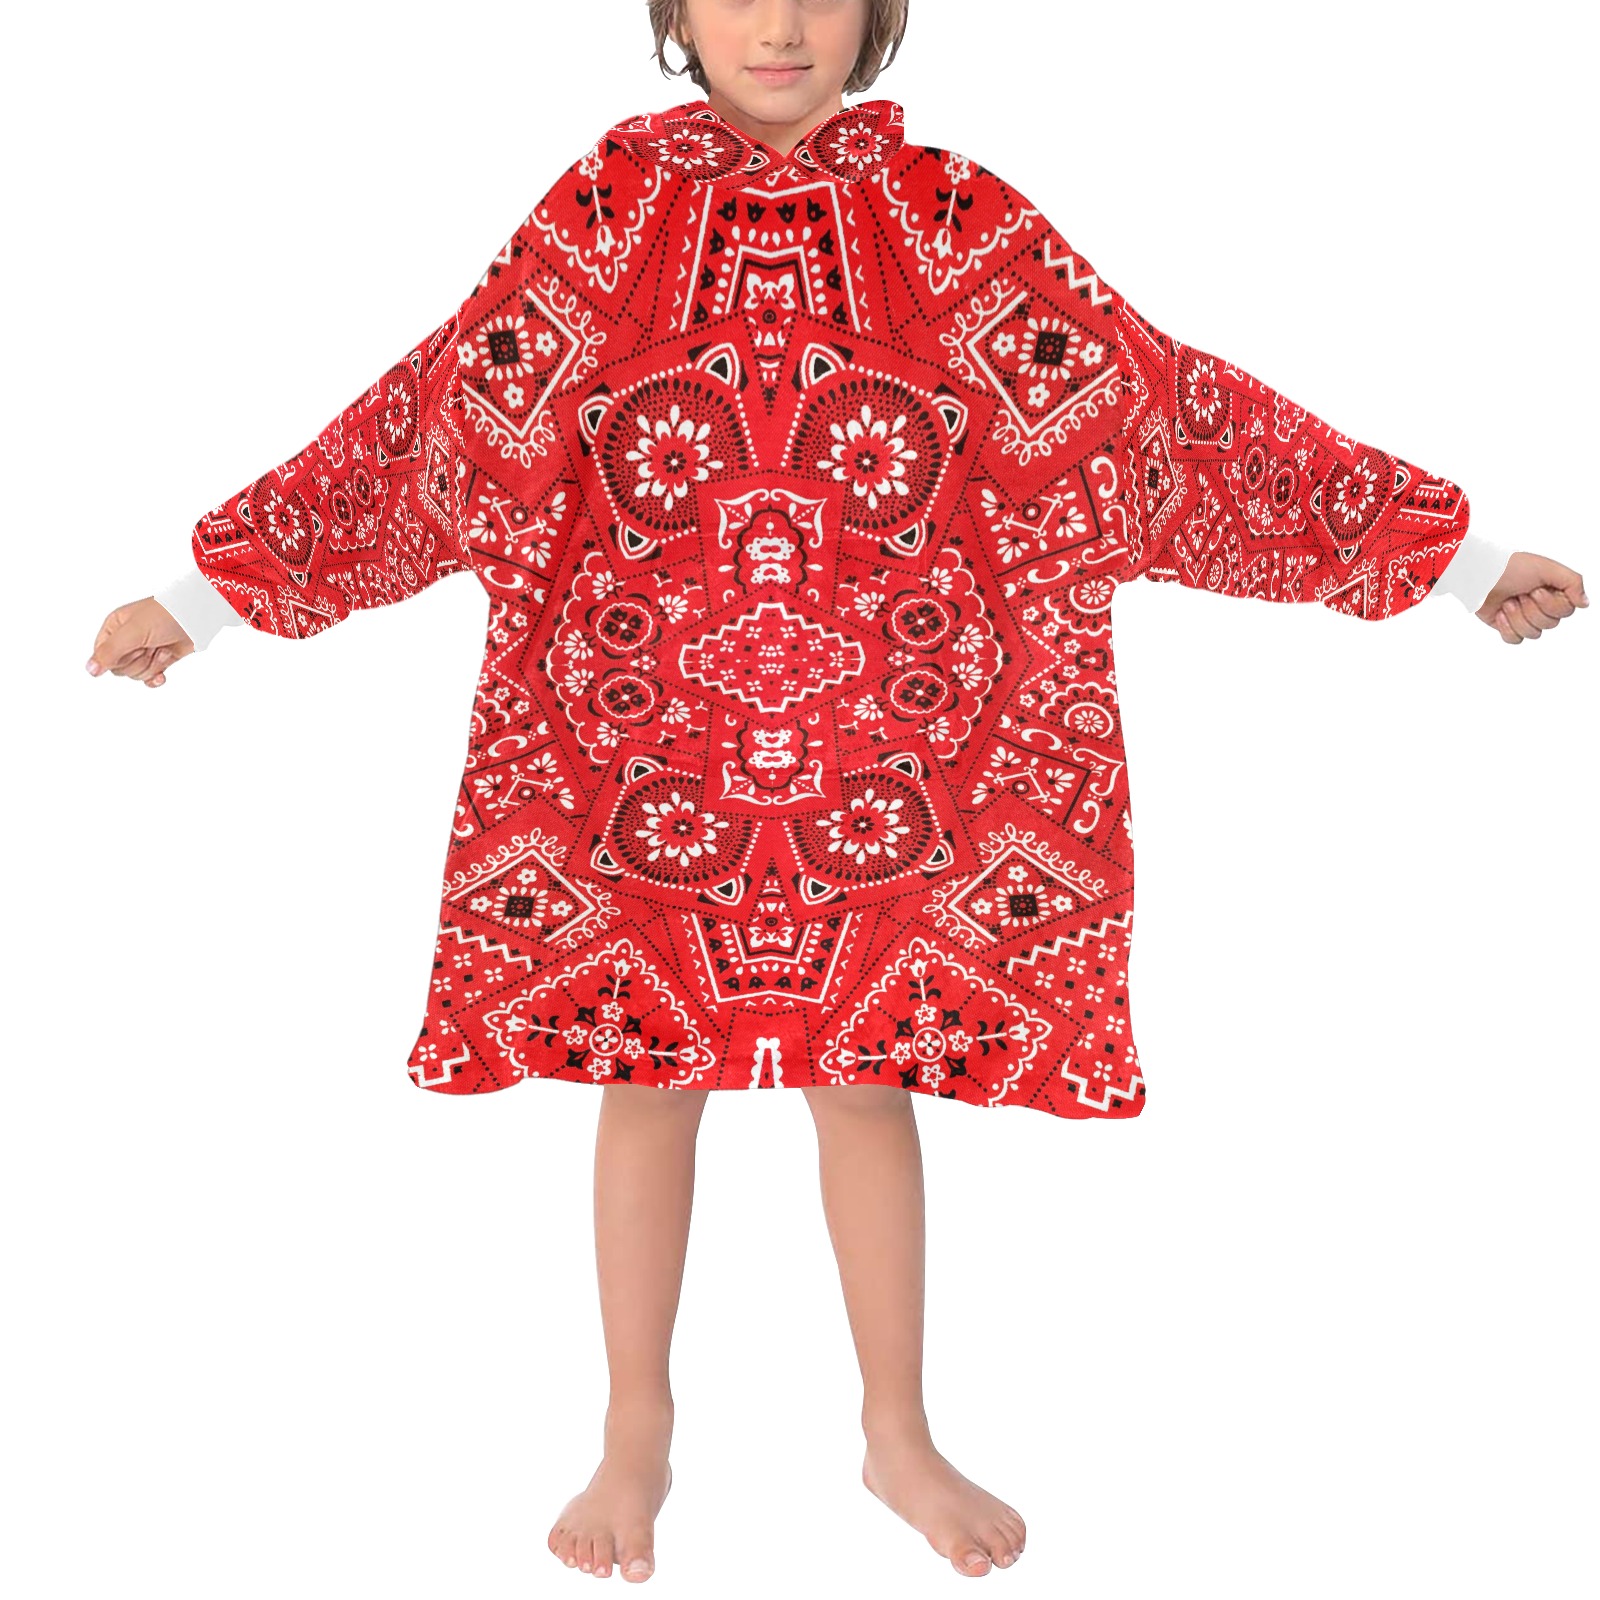 Red Bandana Squares / White Cuff Blanket Hoodie for Kids